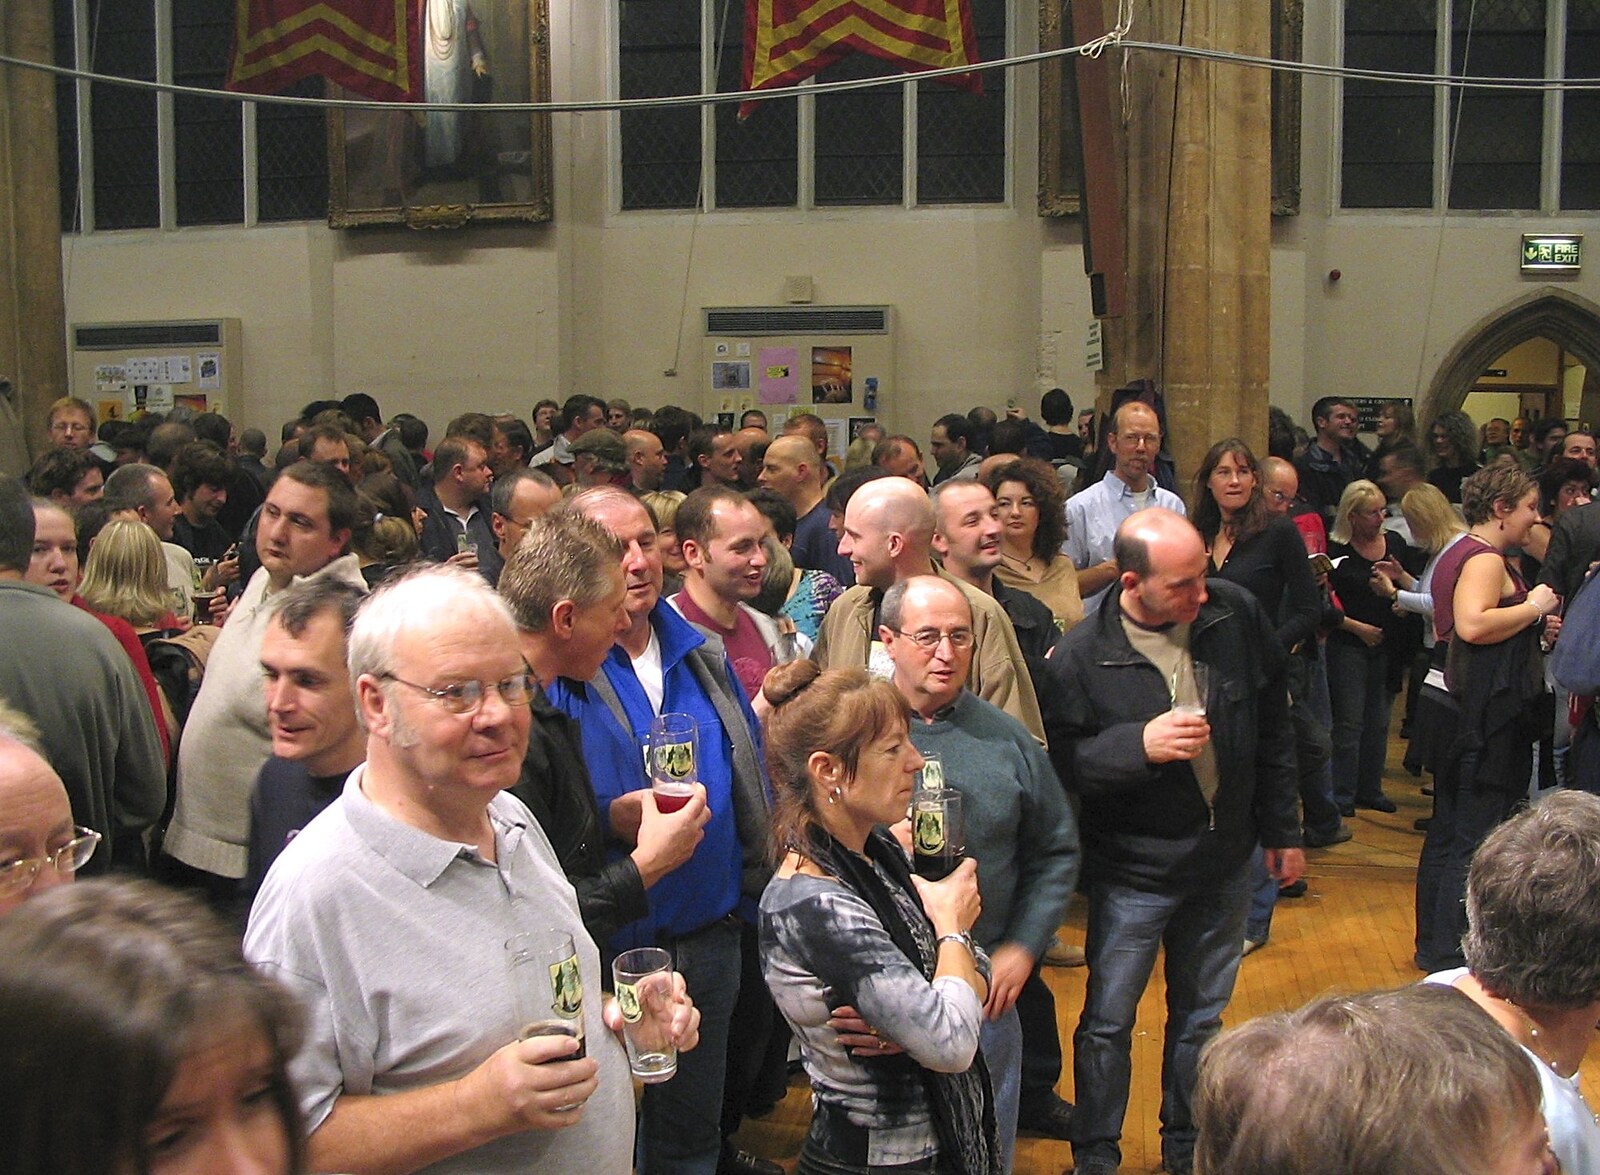 Another crowd scene from The Norfolk and Norwich Beer Festival, St. Andrew's Hall, Norwich - 27th October 2004